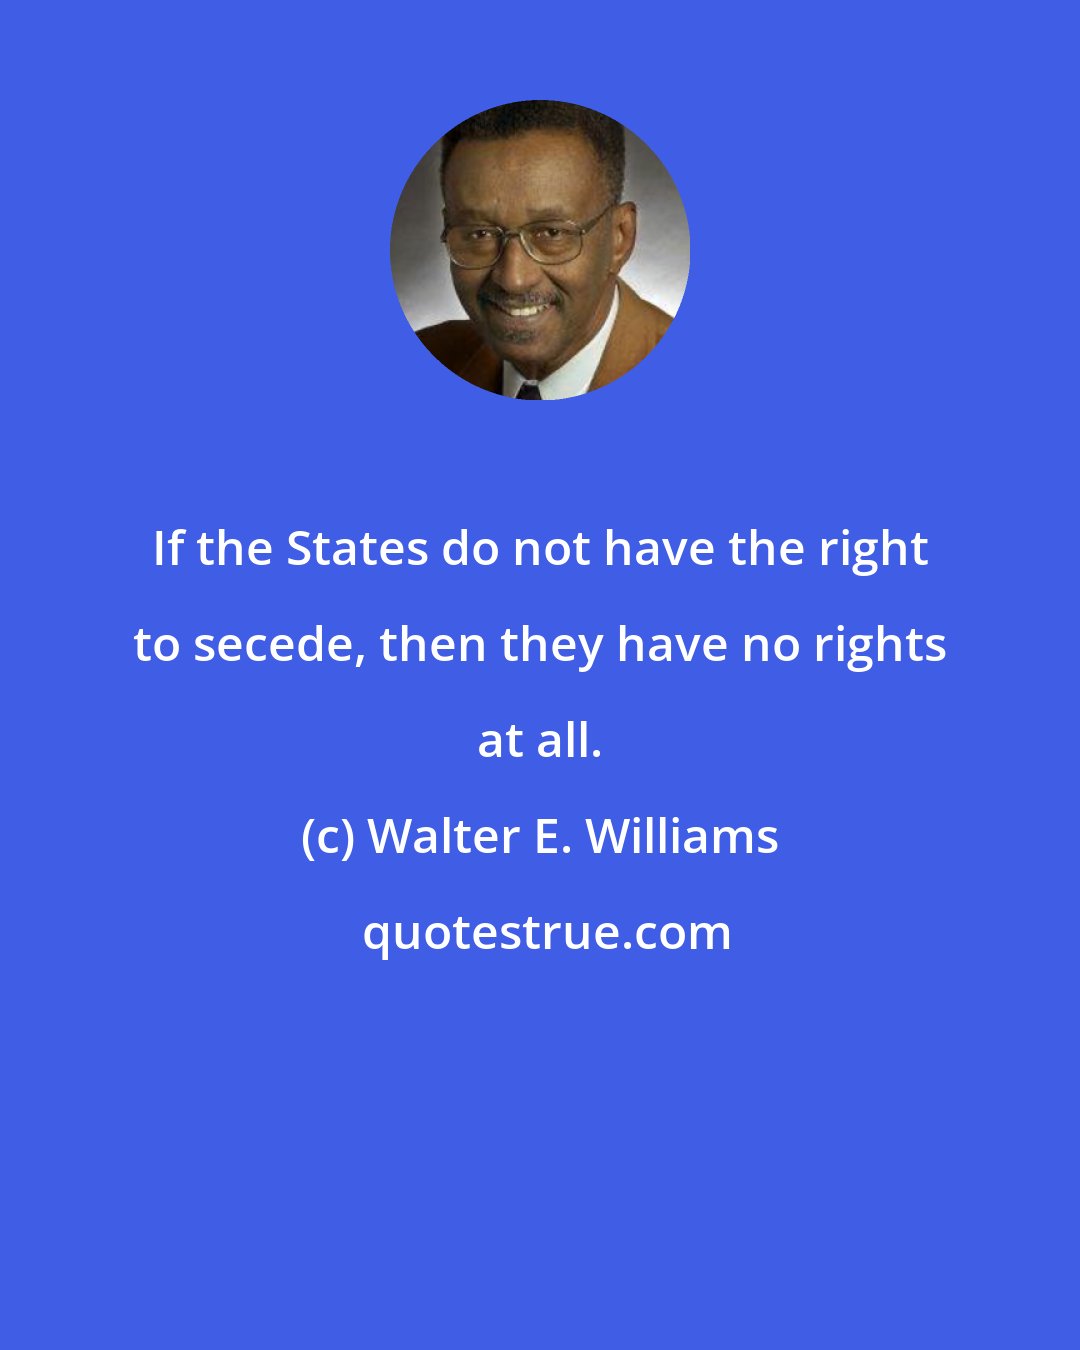 Walter E. Williams: If the States do not have the right to secede, then they have no rights at all.